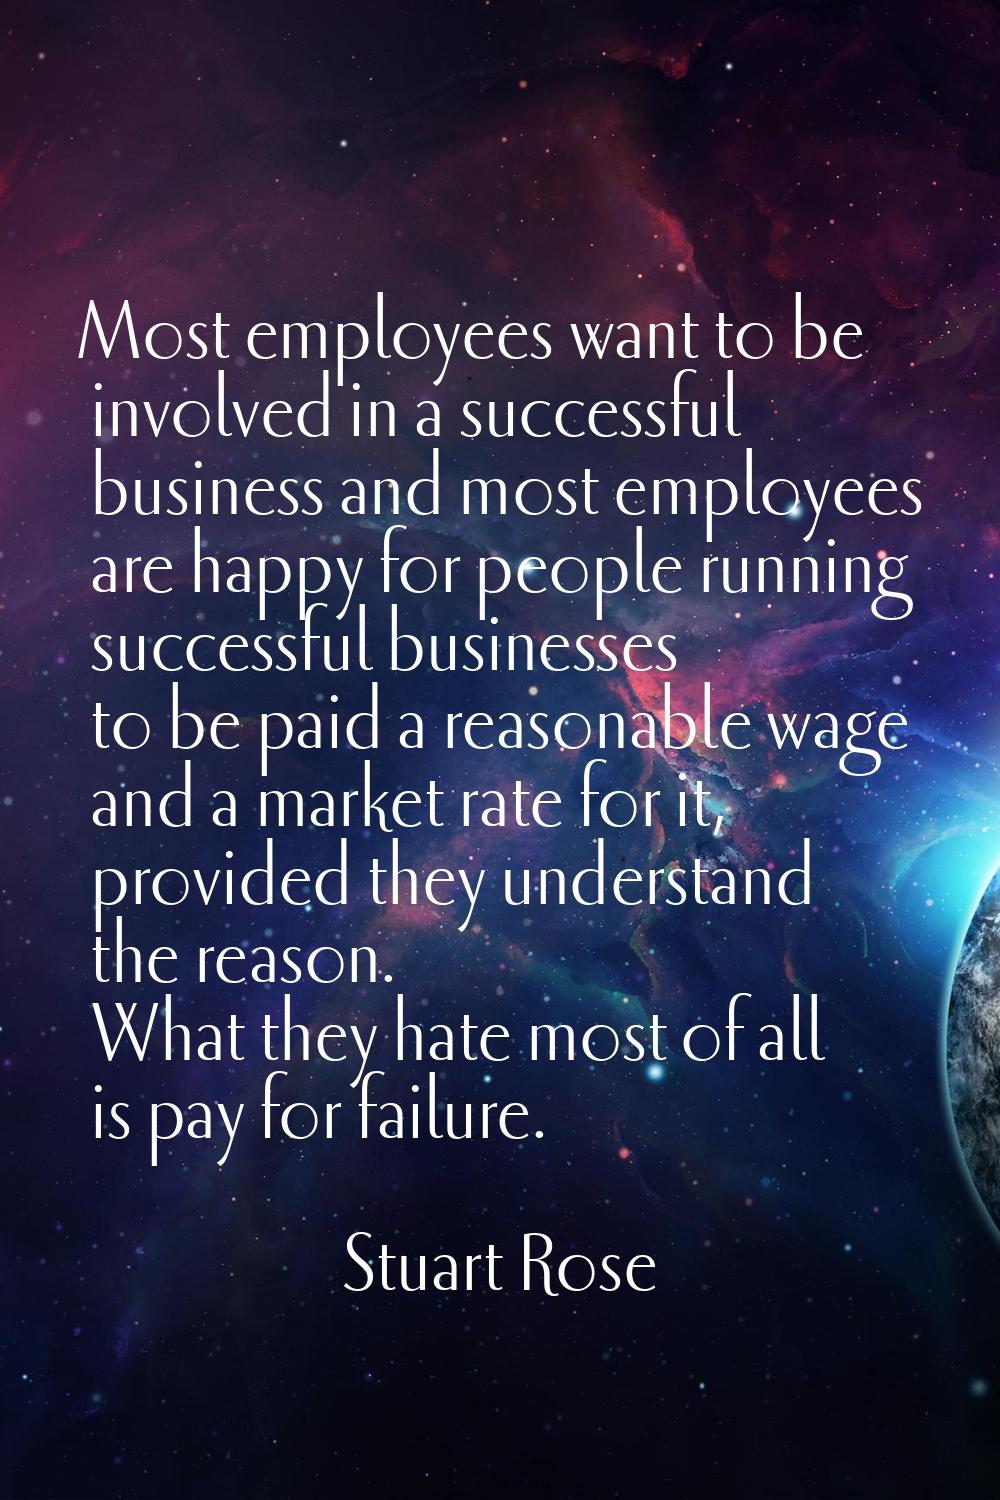 Most employees want to be involved in a successful business and most employees are happy for people